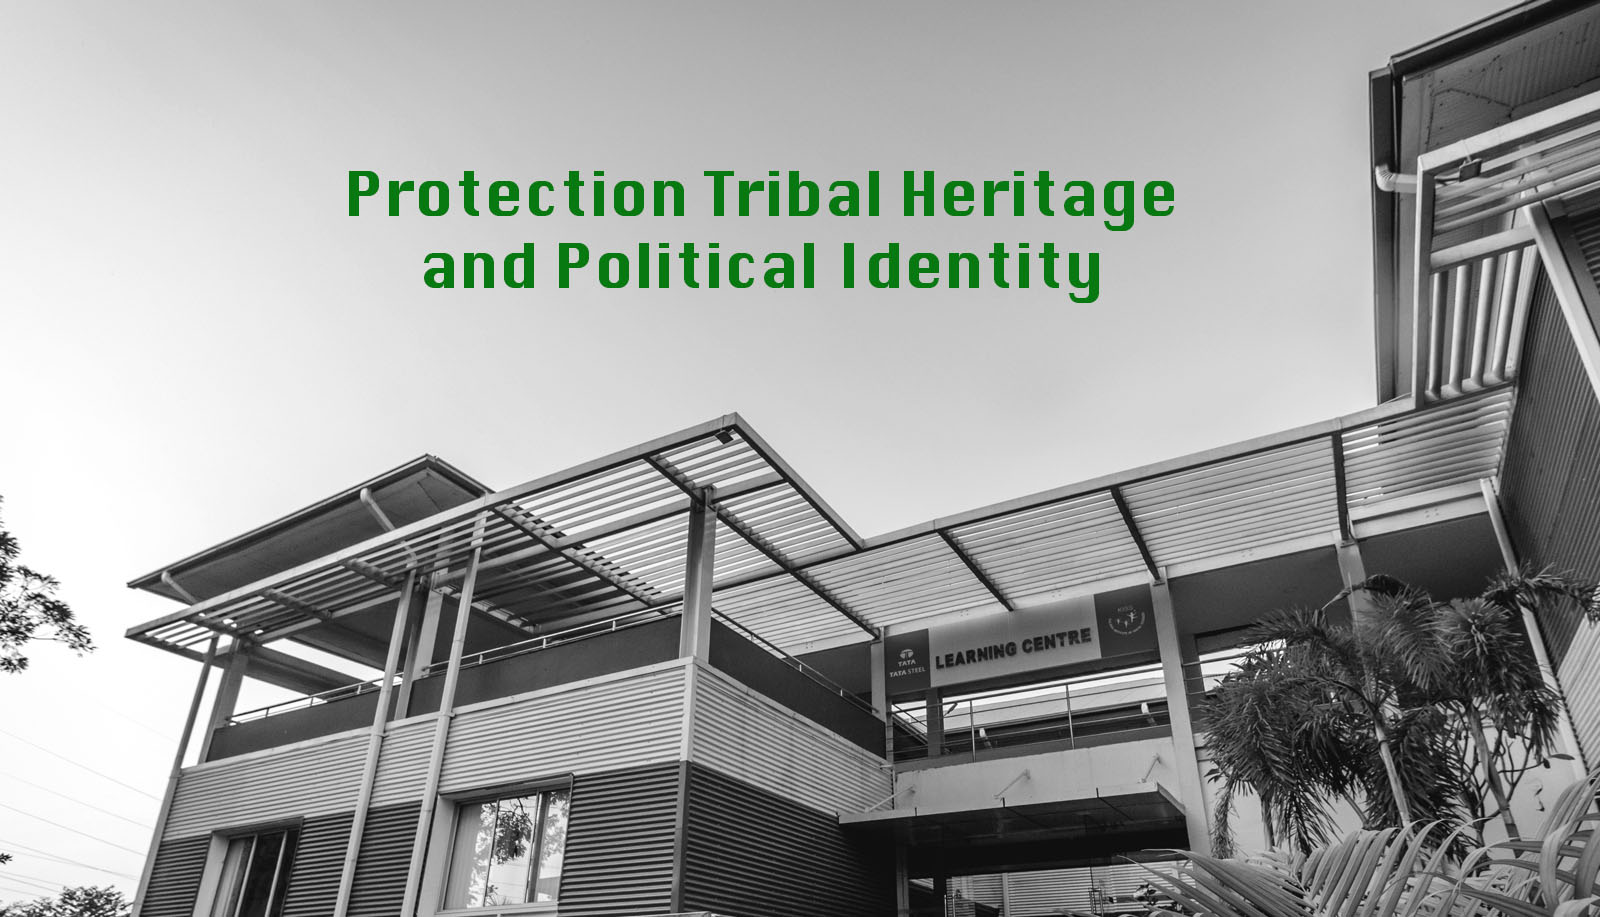 Protection Tribal Heritage and Political Identity